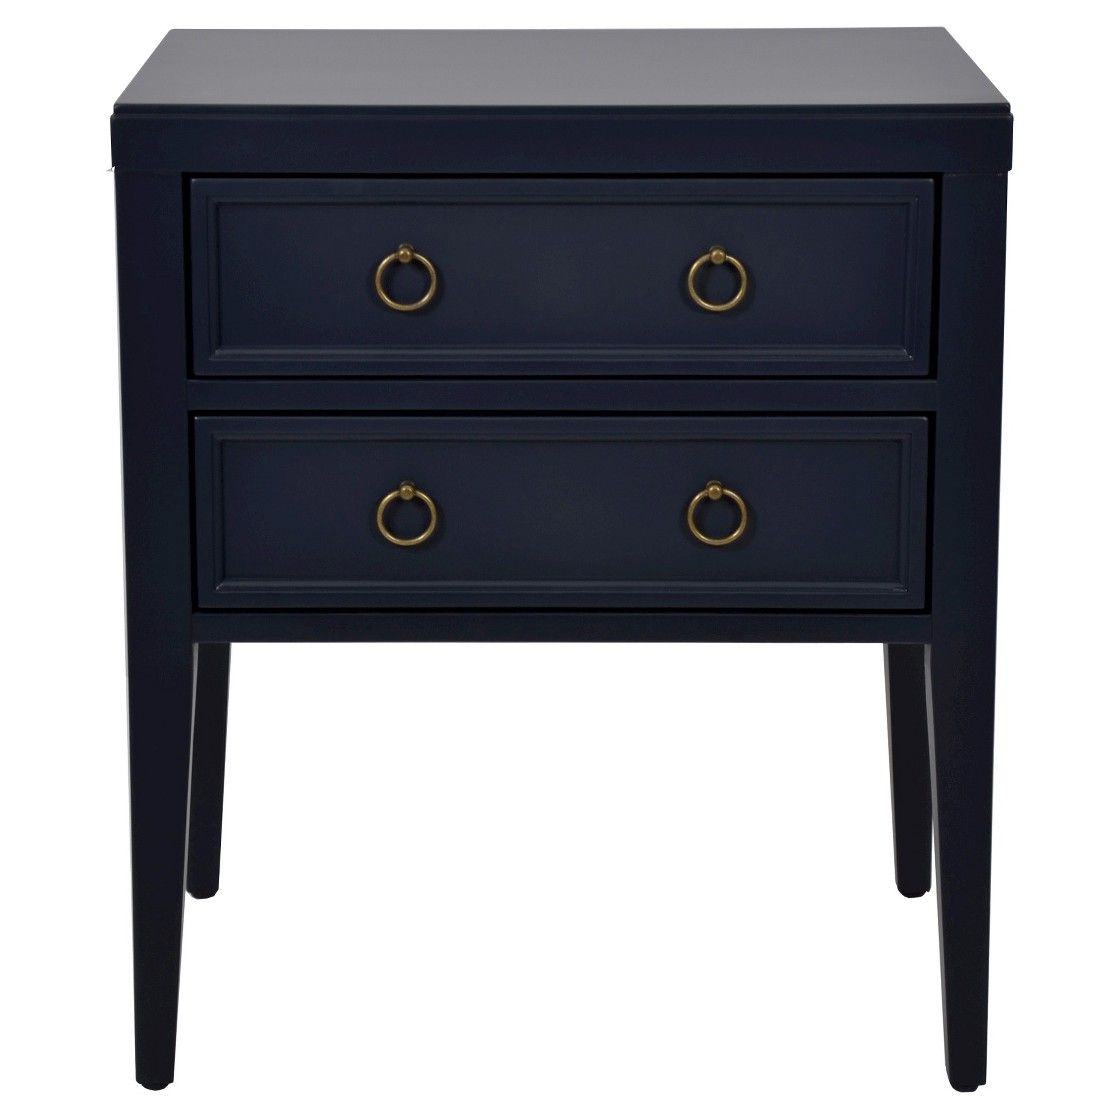 love this bedside table options classic dark moody yet riva end painted black threshold traditional the brass pulls glass dining furniture sets chairs for fire pit area white